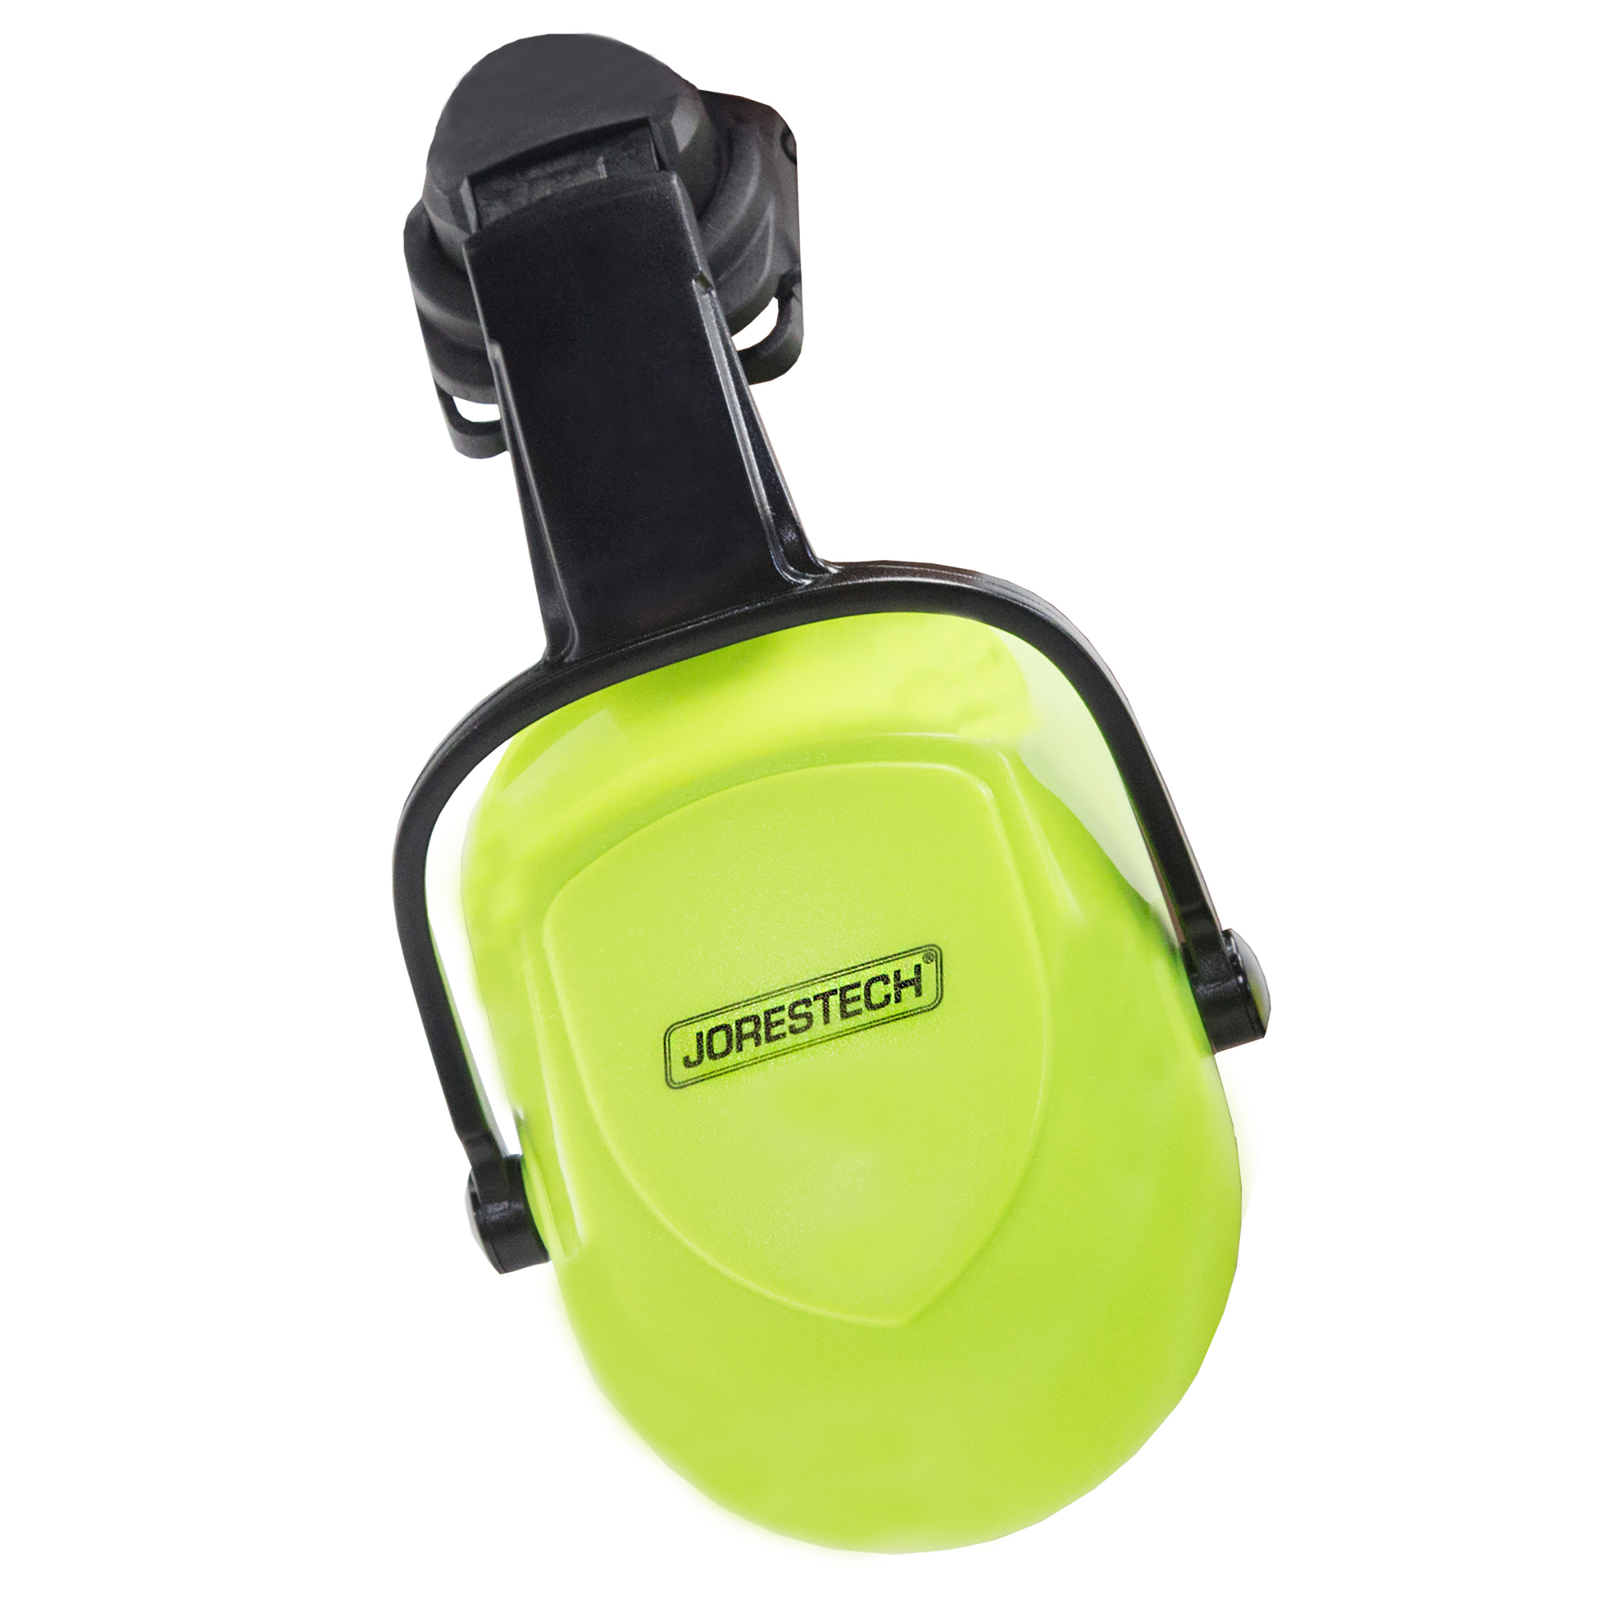 Outer lime cap of the JORESTECH® ear muffs for slotted hard hats over white background